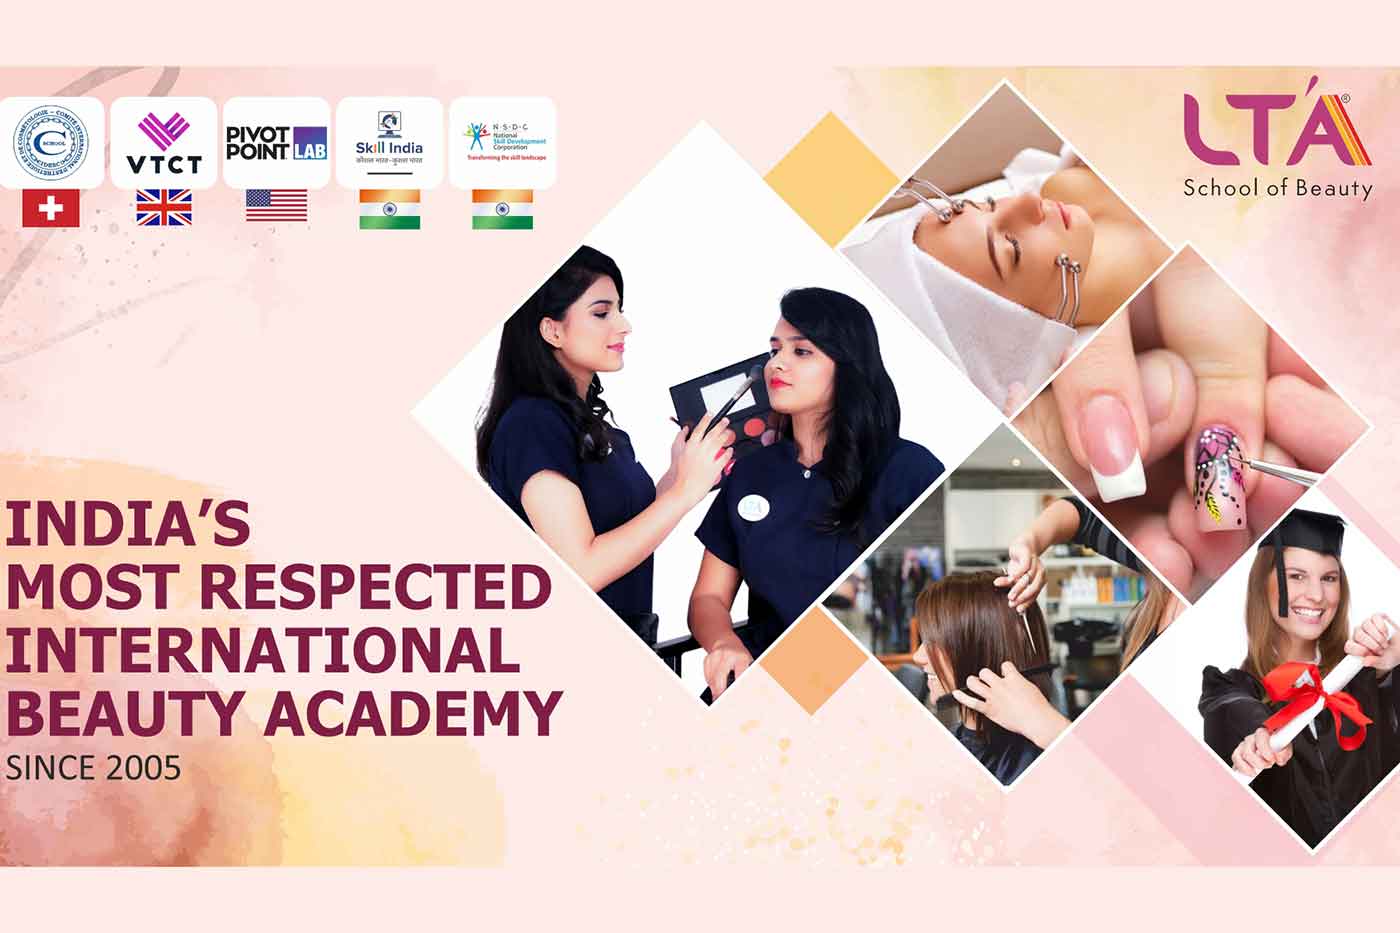 LTA School of Beauty launches a Master’s Program in Beauty cosmetology